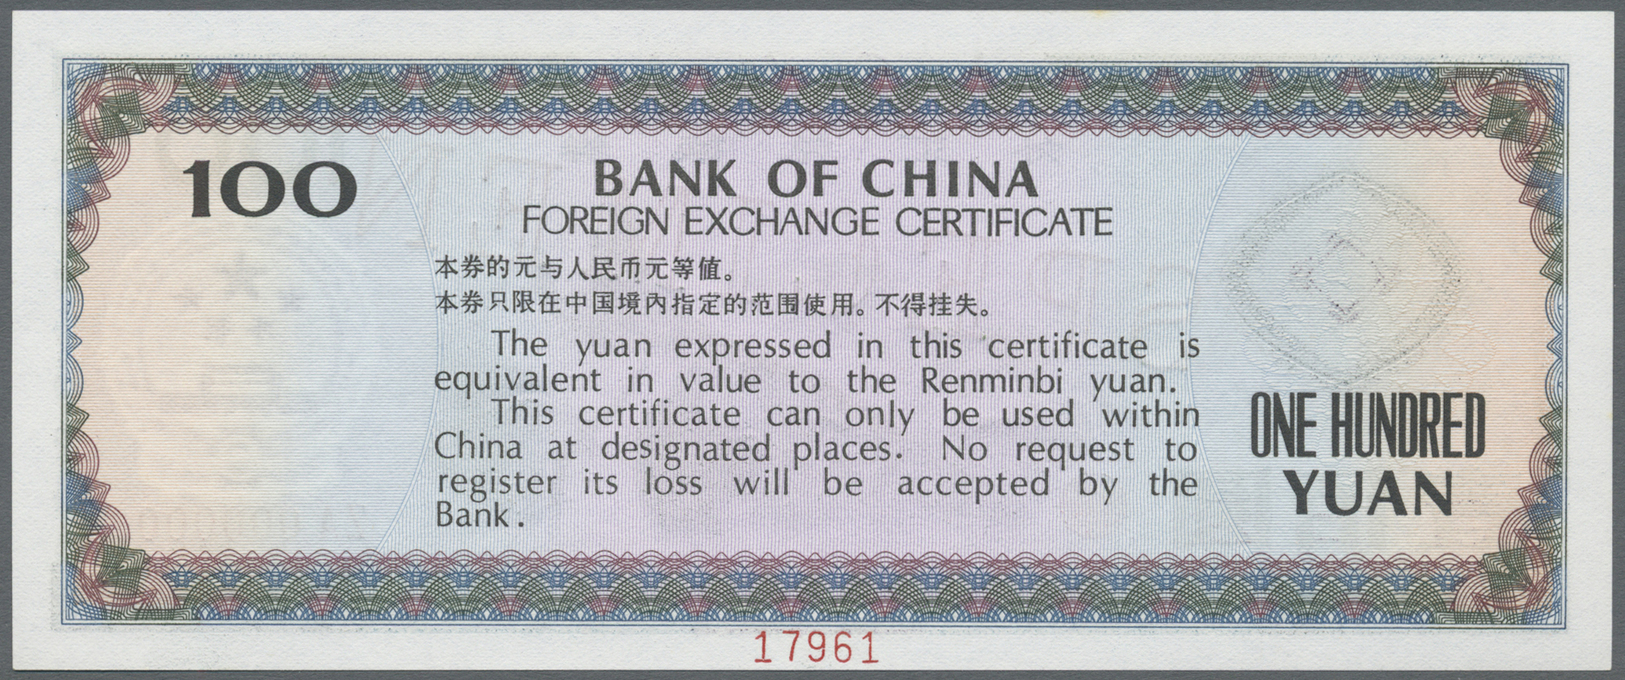 00555 China: 100 Yuan ND Foreign Exchange Certificate Specimen P. FX7s, In Condition: UNC. - China